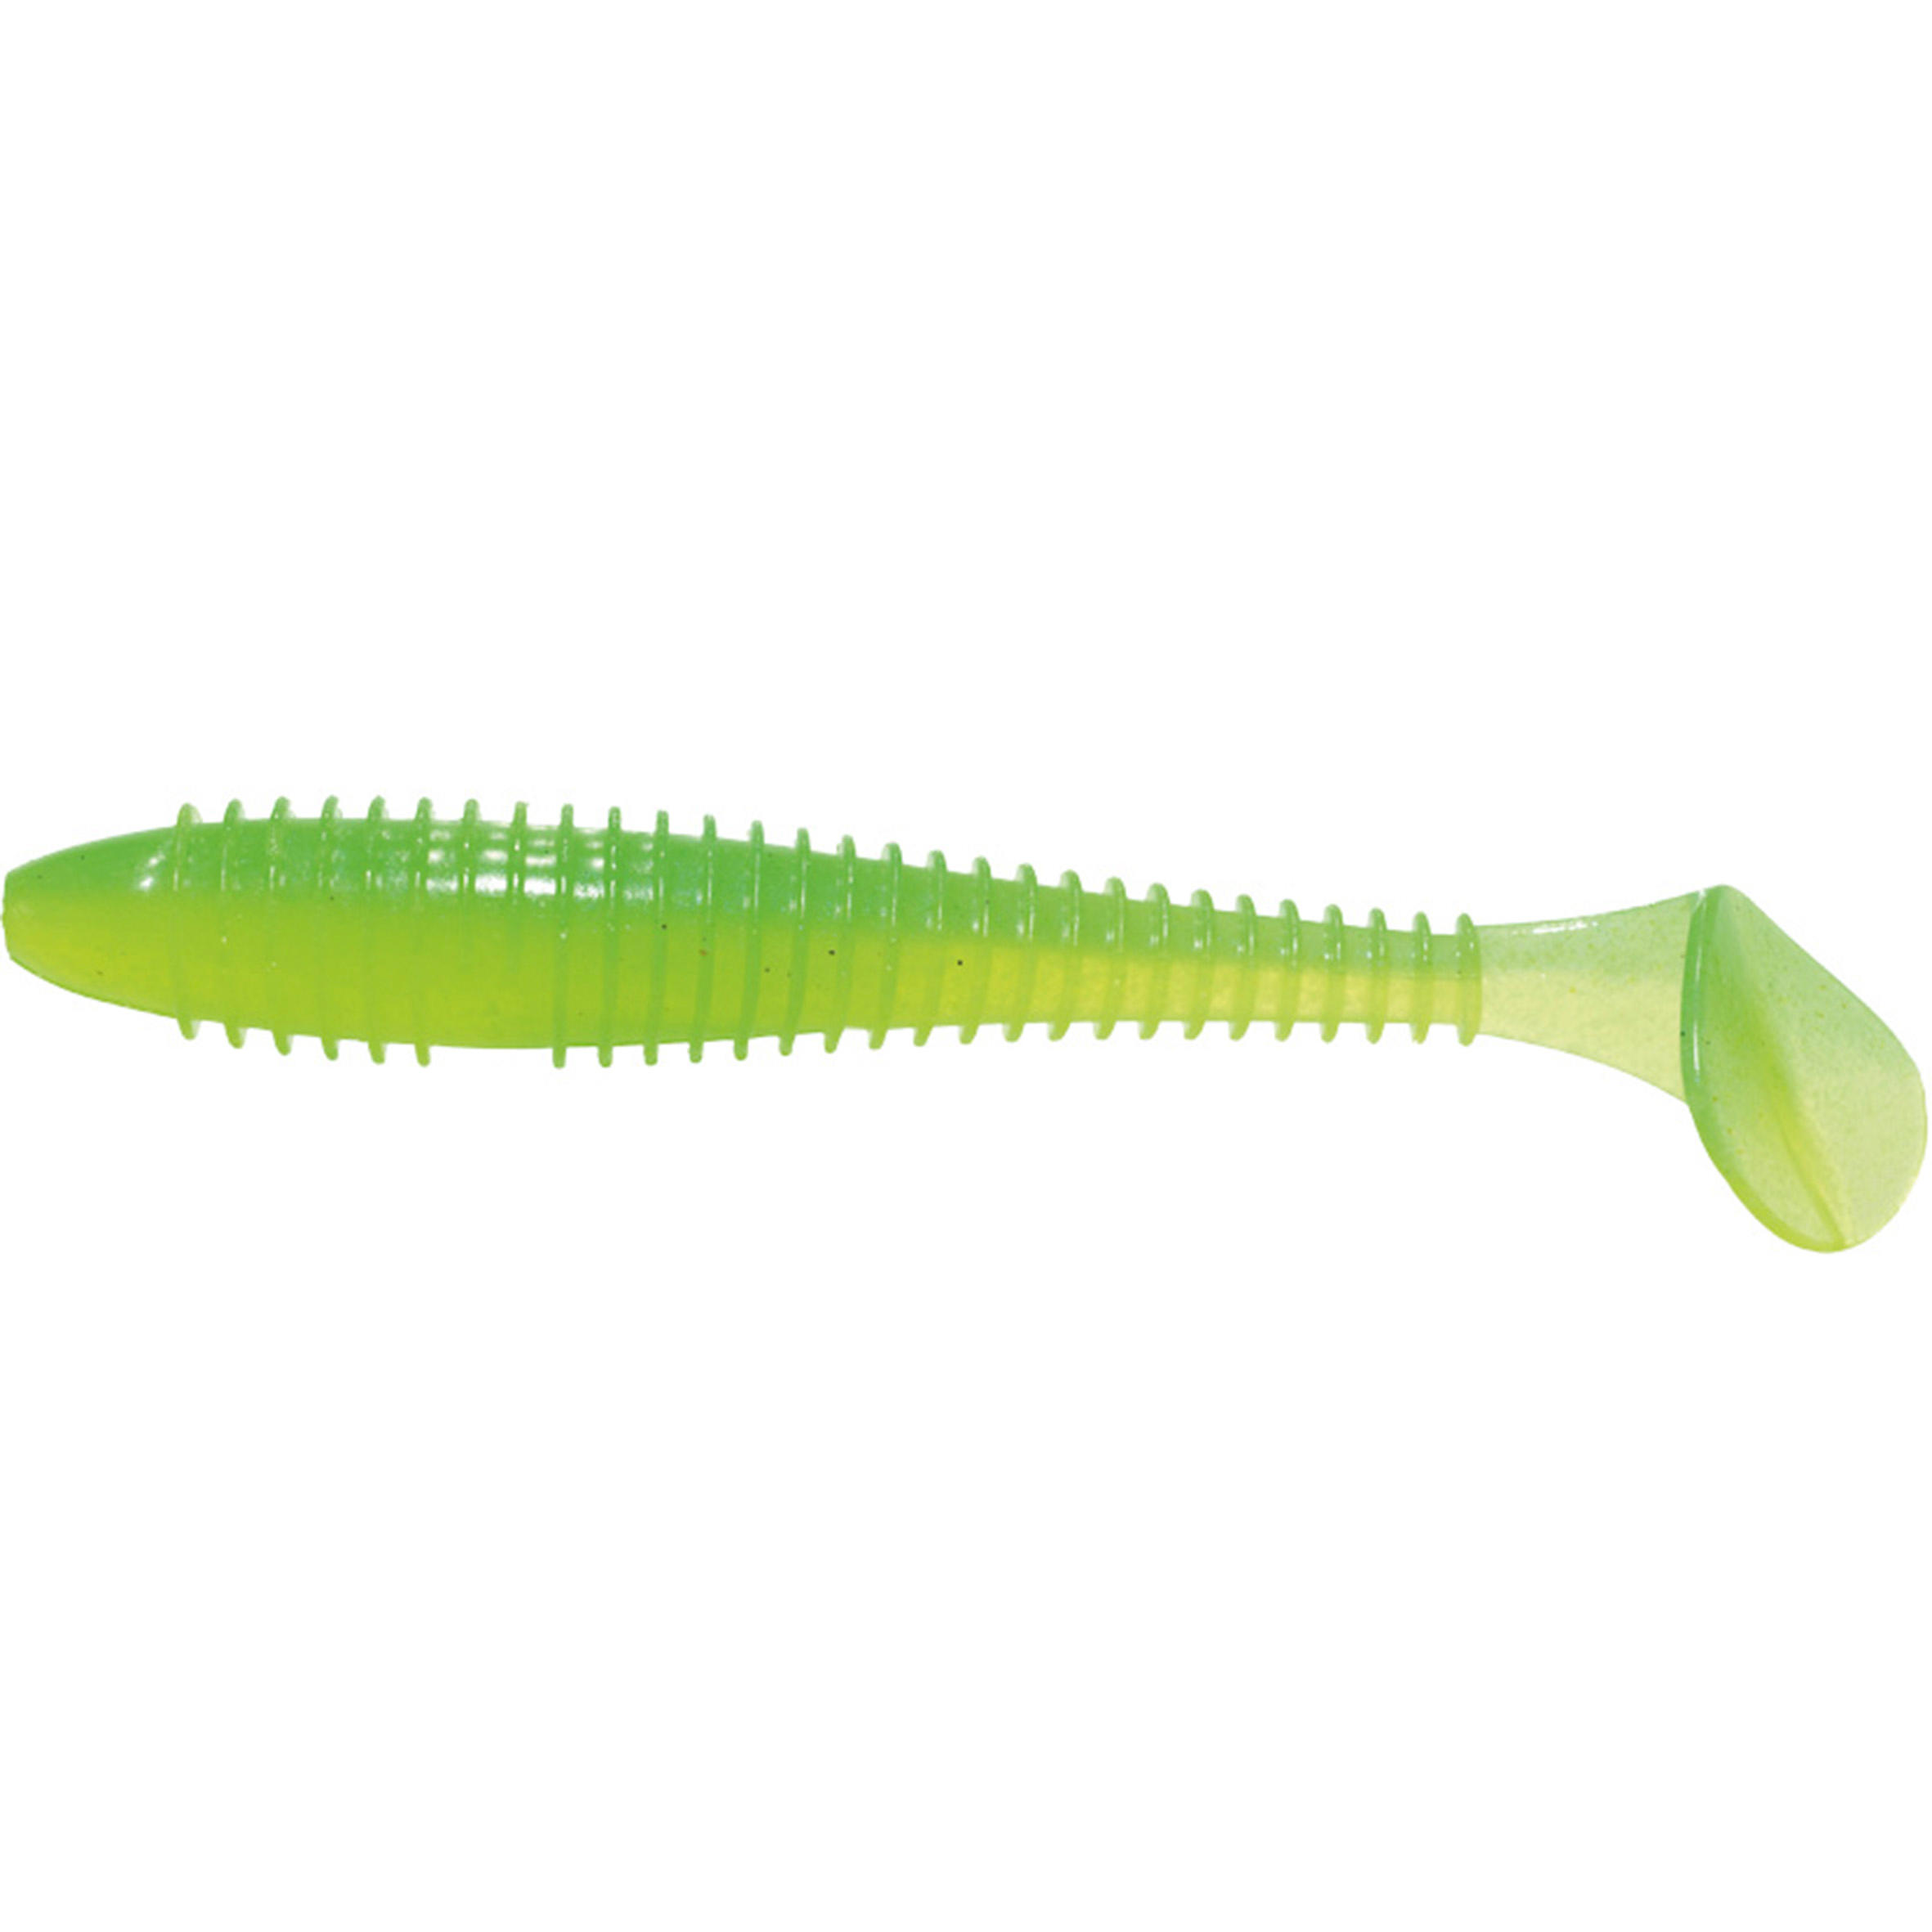 LURE FISHING SUPPLE LURE FAT SWING IMP 2.8 - LIME/CHARTREUSE 1/1